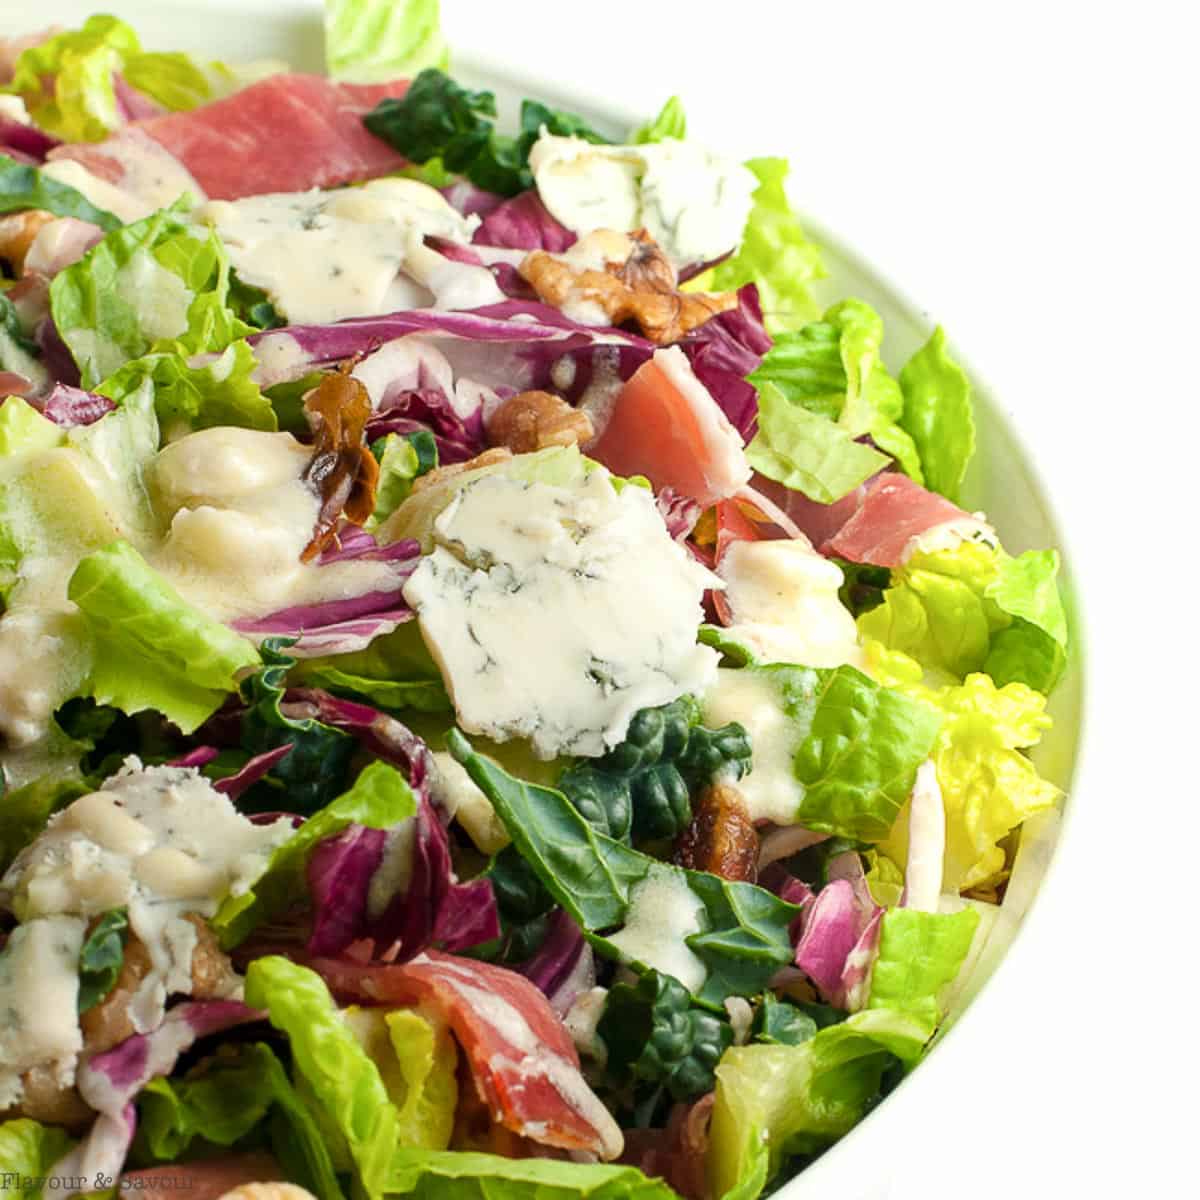 hearty Tuscan salad with kale, radicchio and romaine leaves.